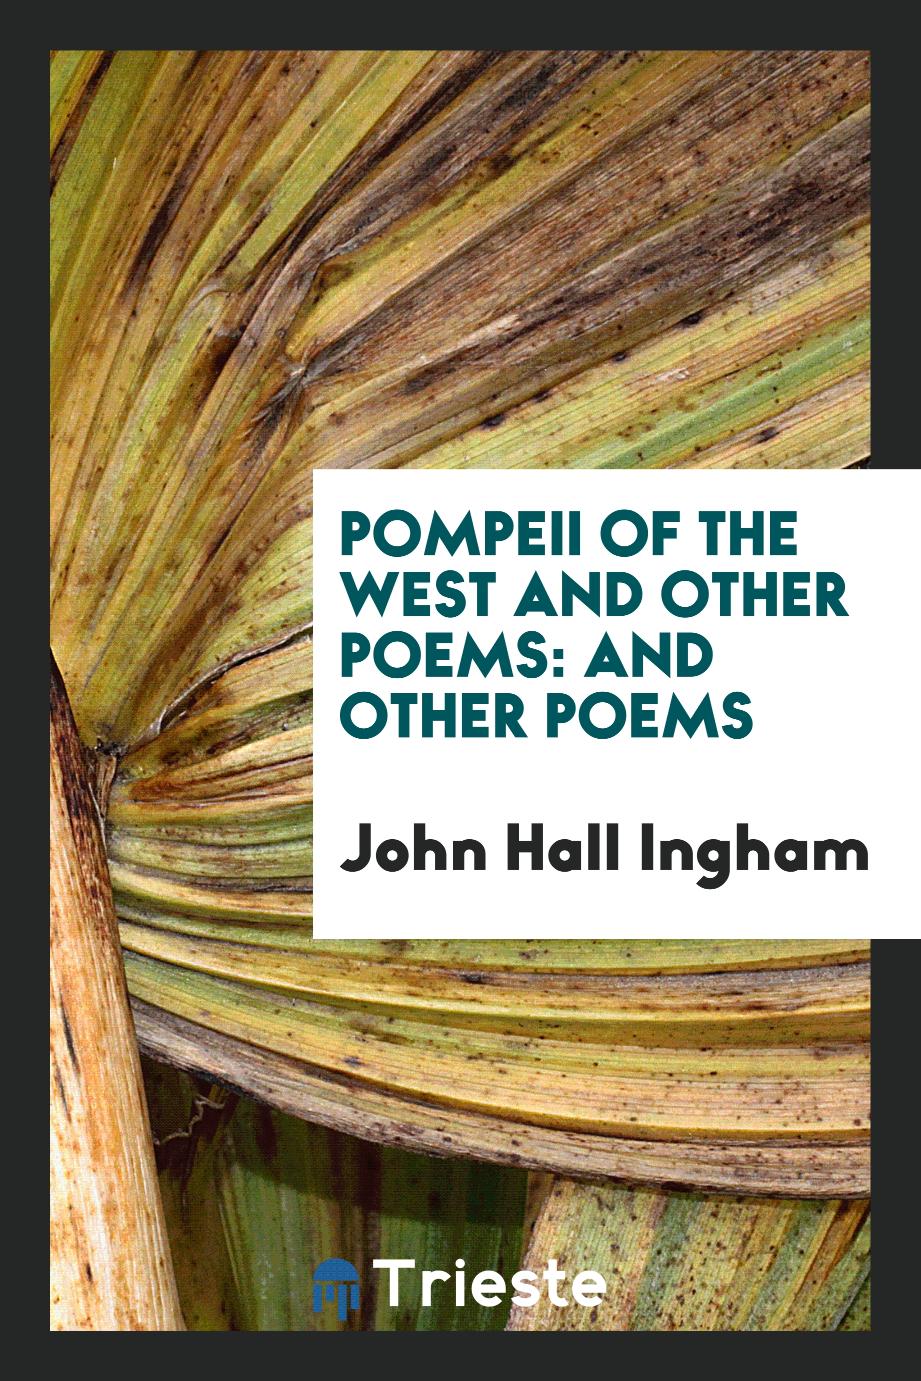 Pompeii of the West and Other Poems: And Other Poems